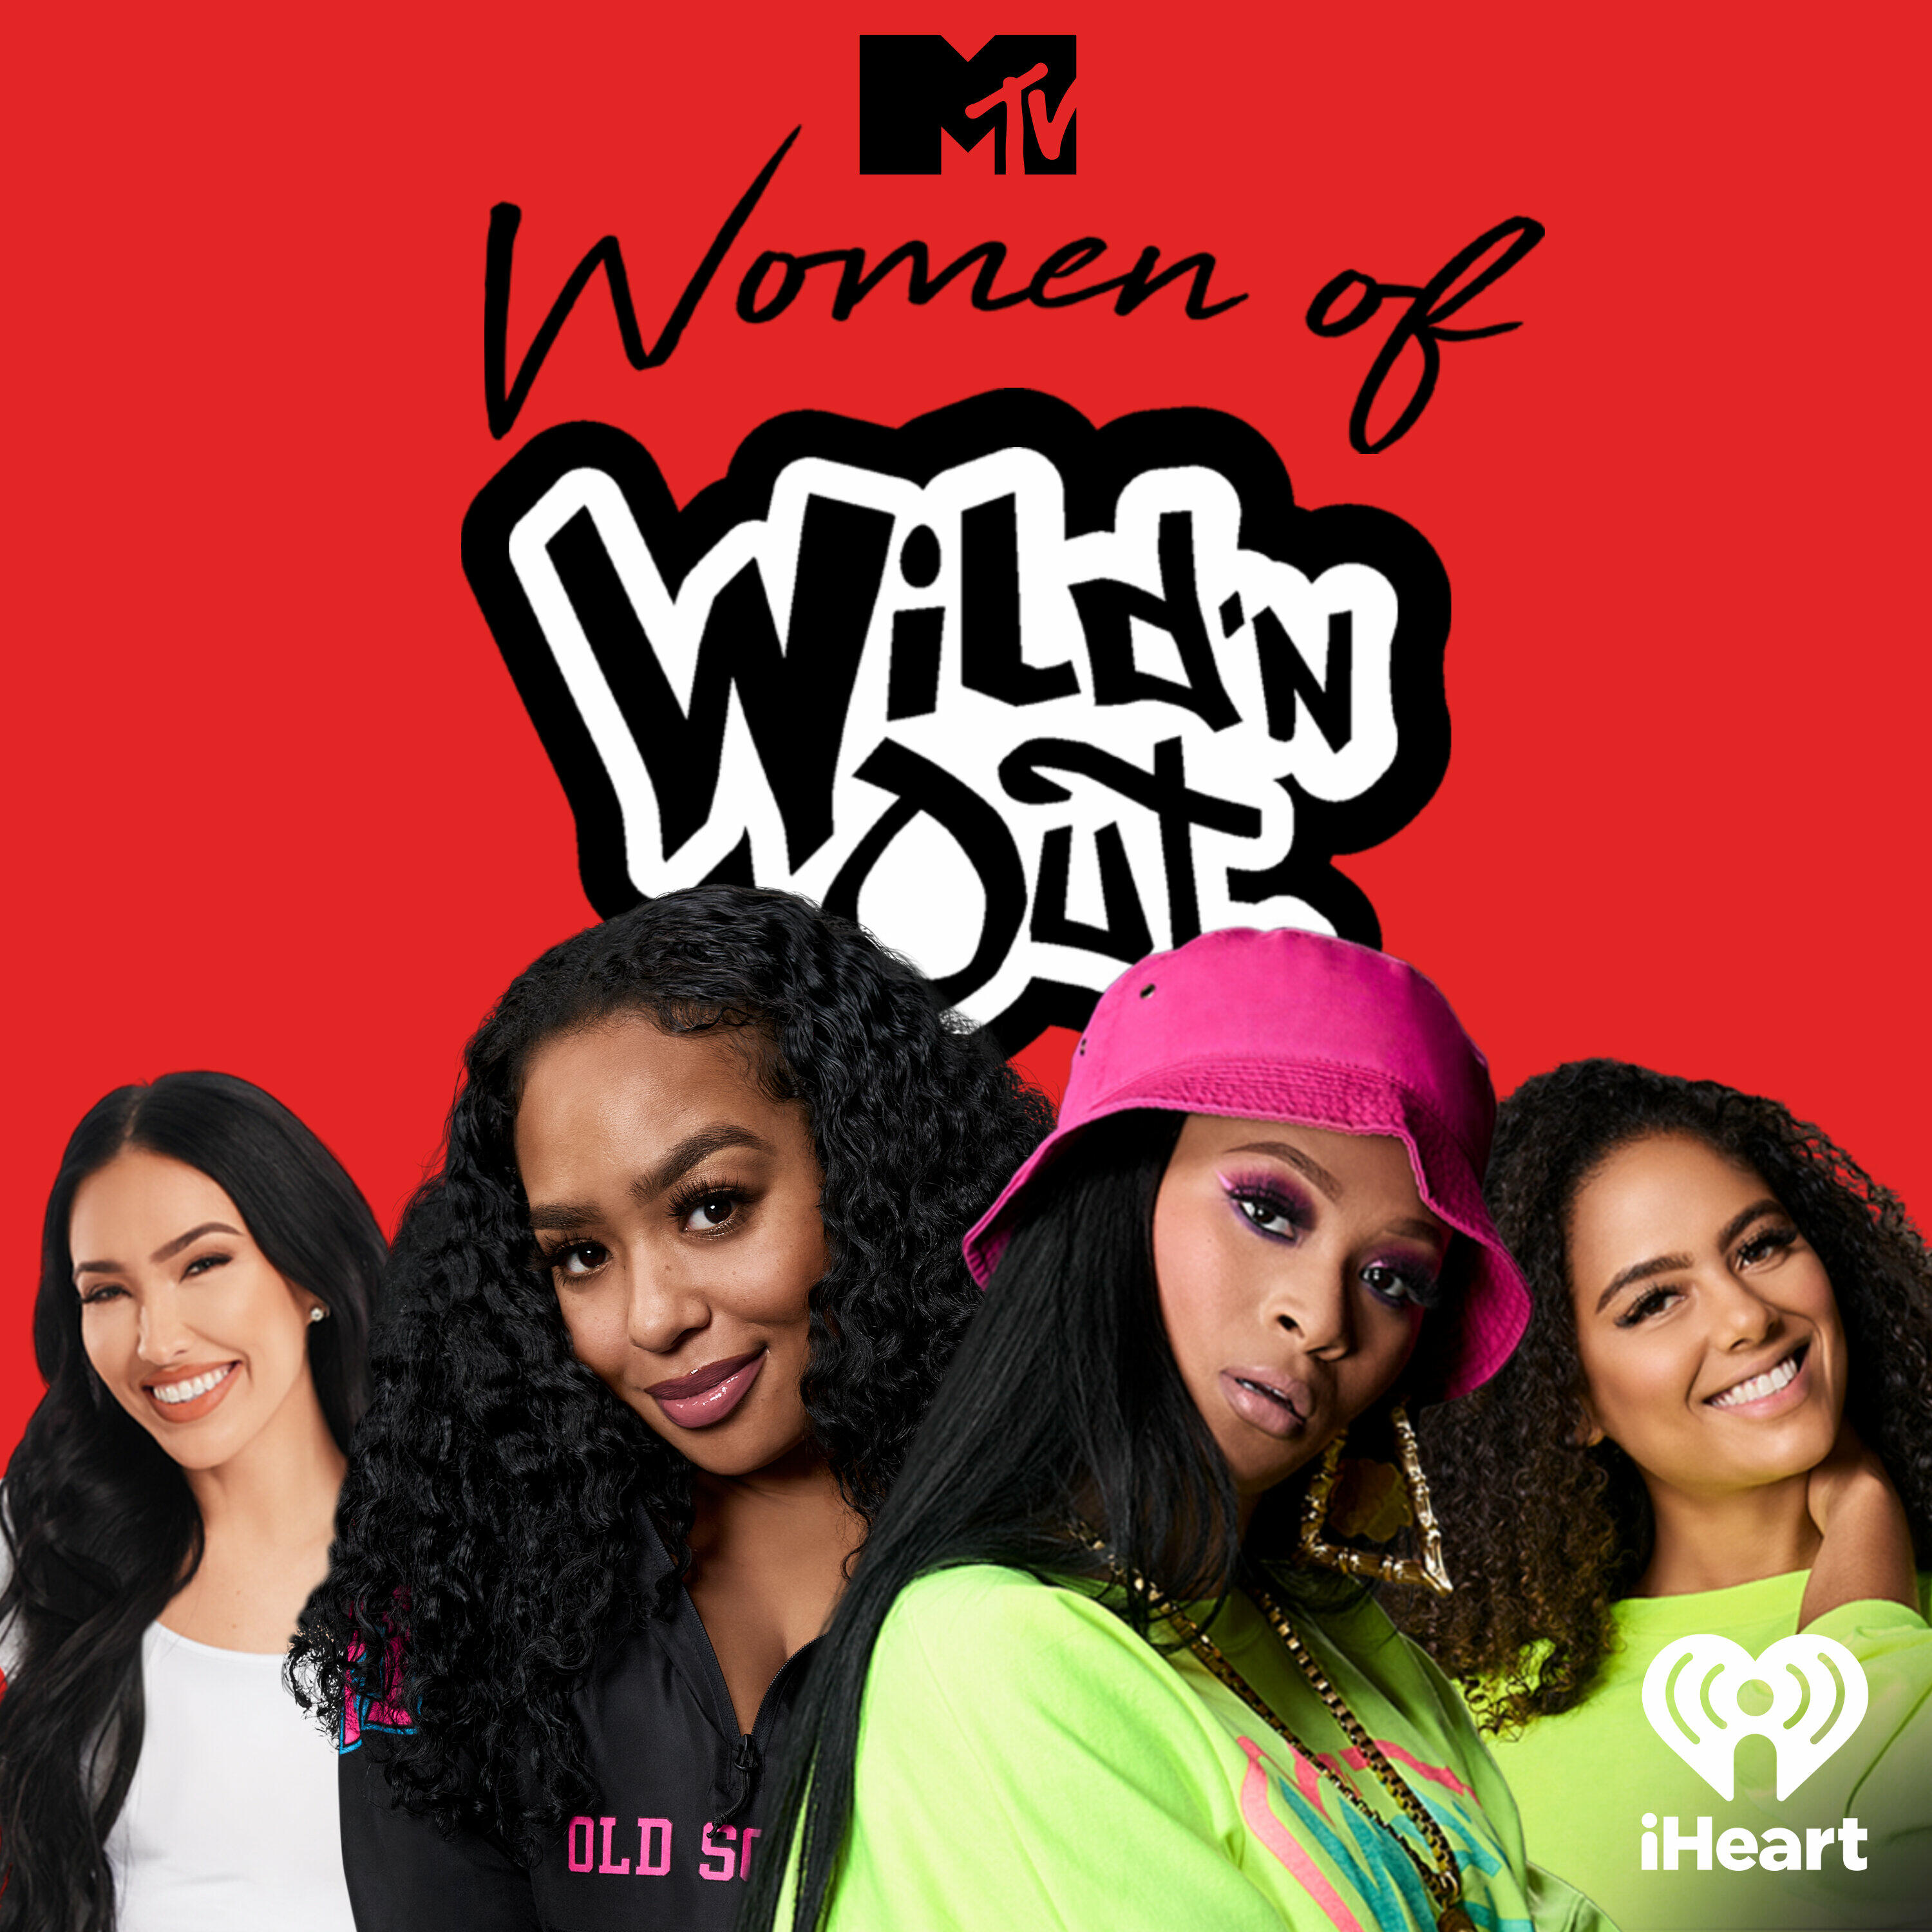 MTV's Women of Wild 'N Out iHeart